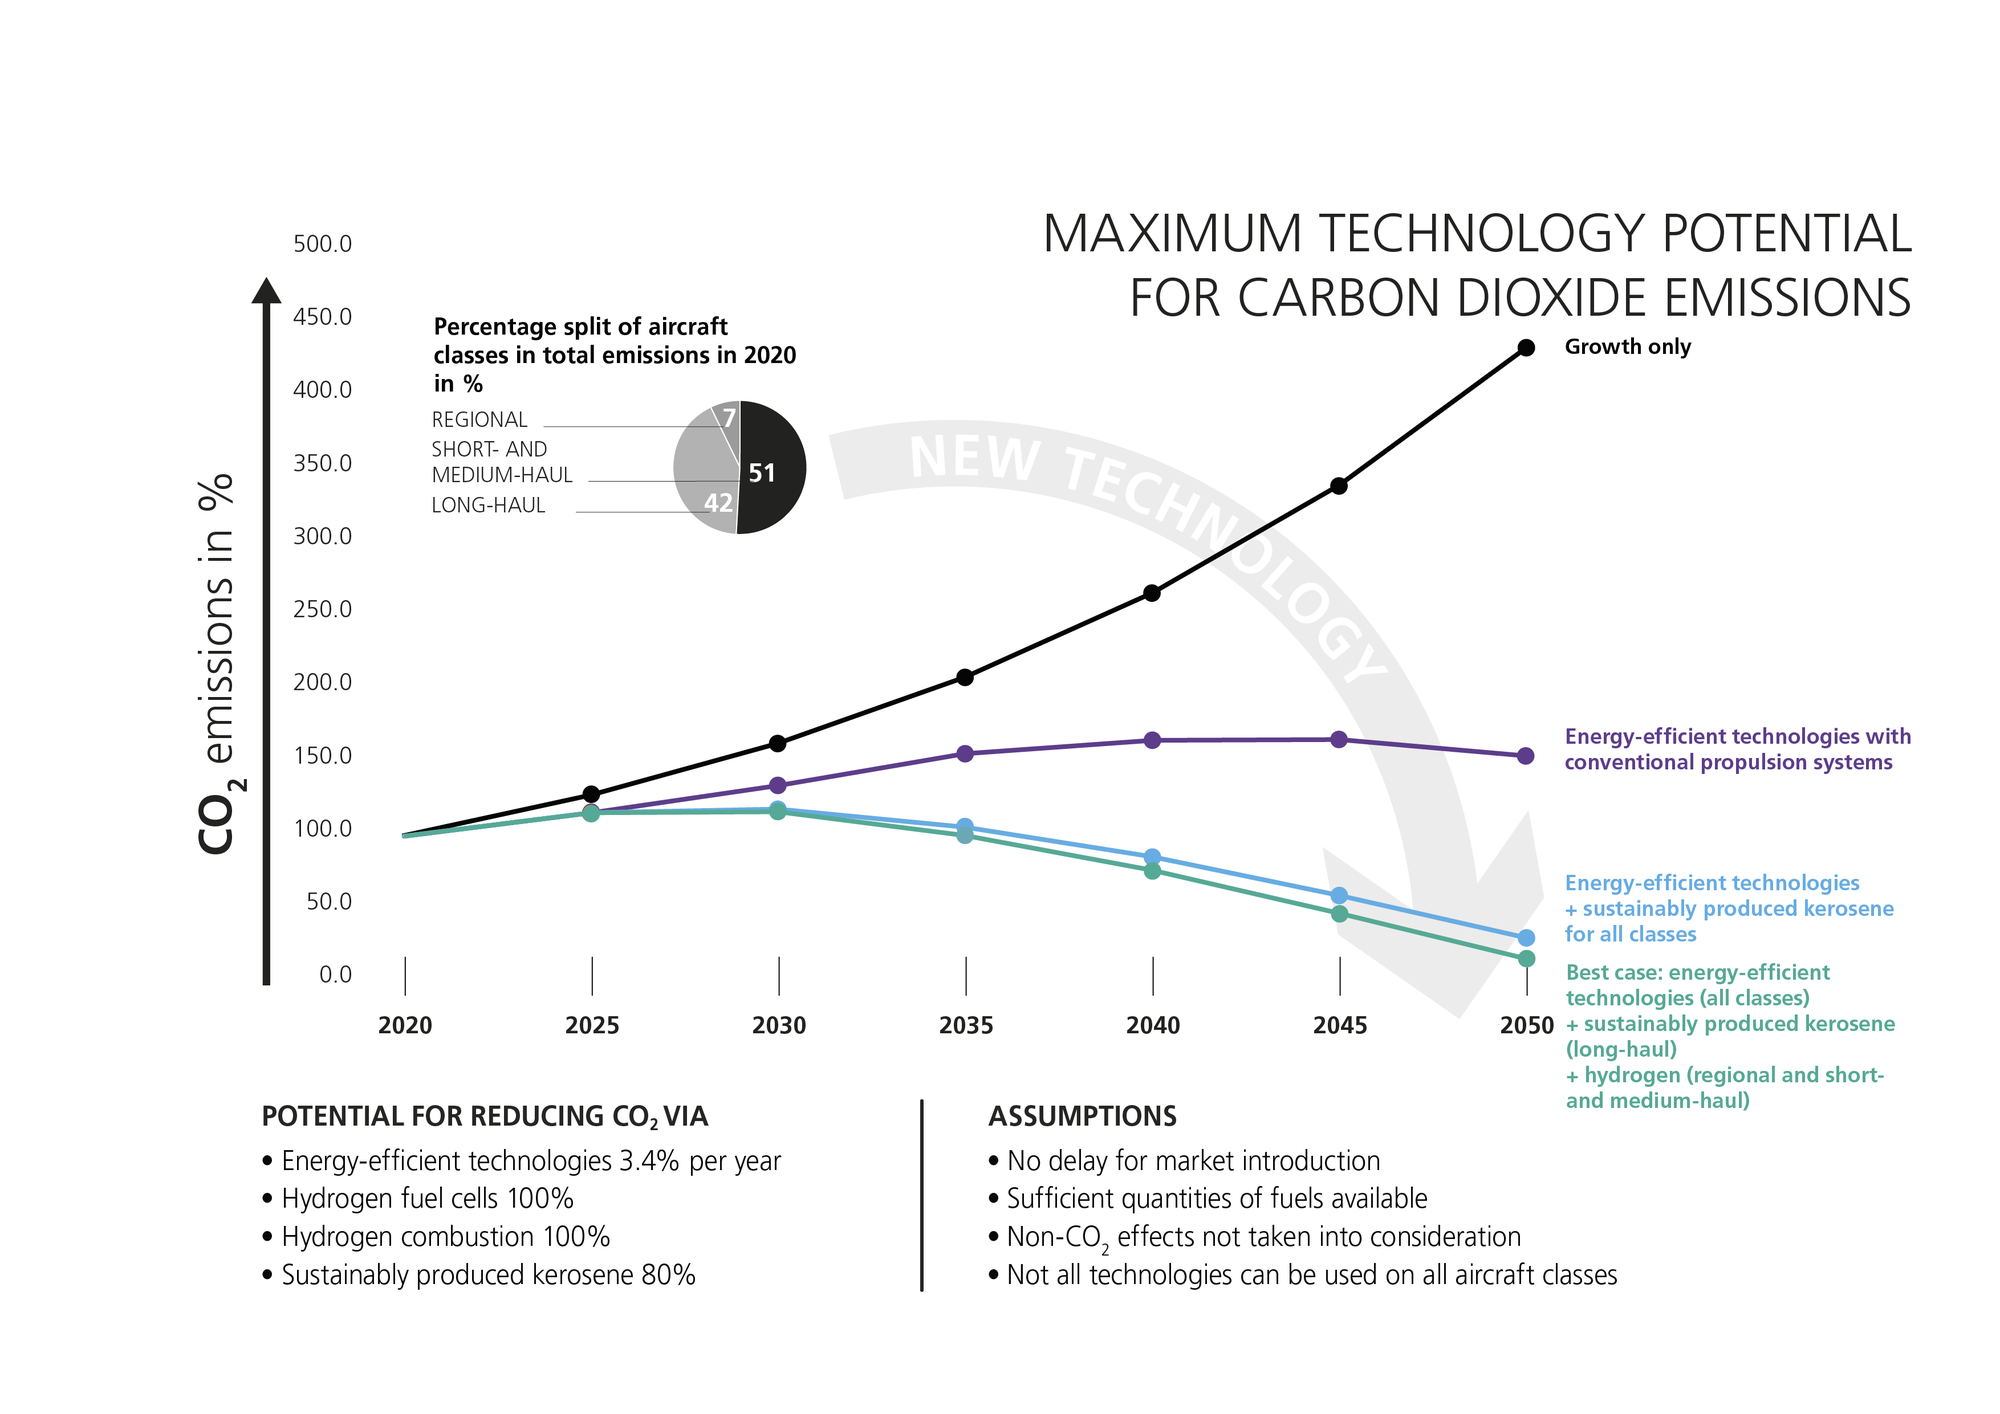 Maximum technology potential for curbing carbon dioxide emissions